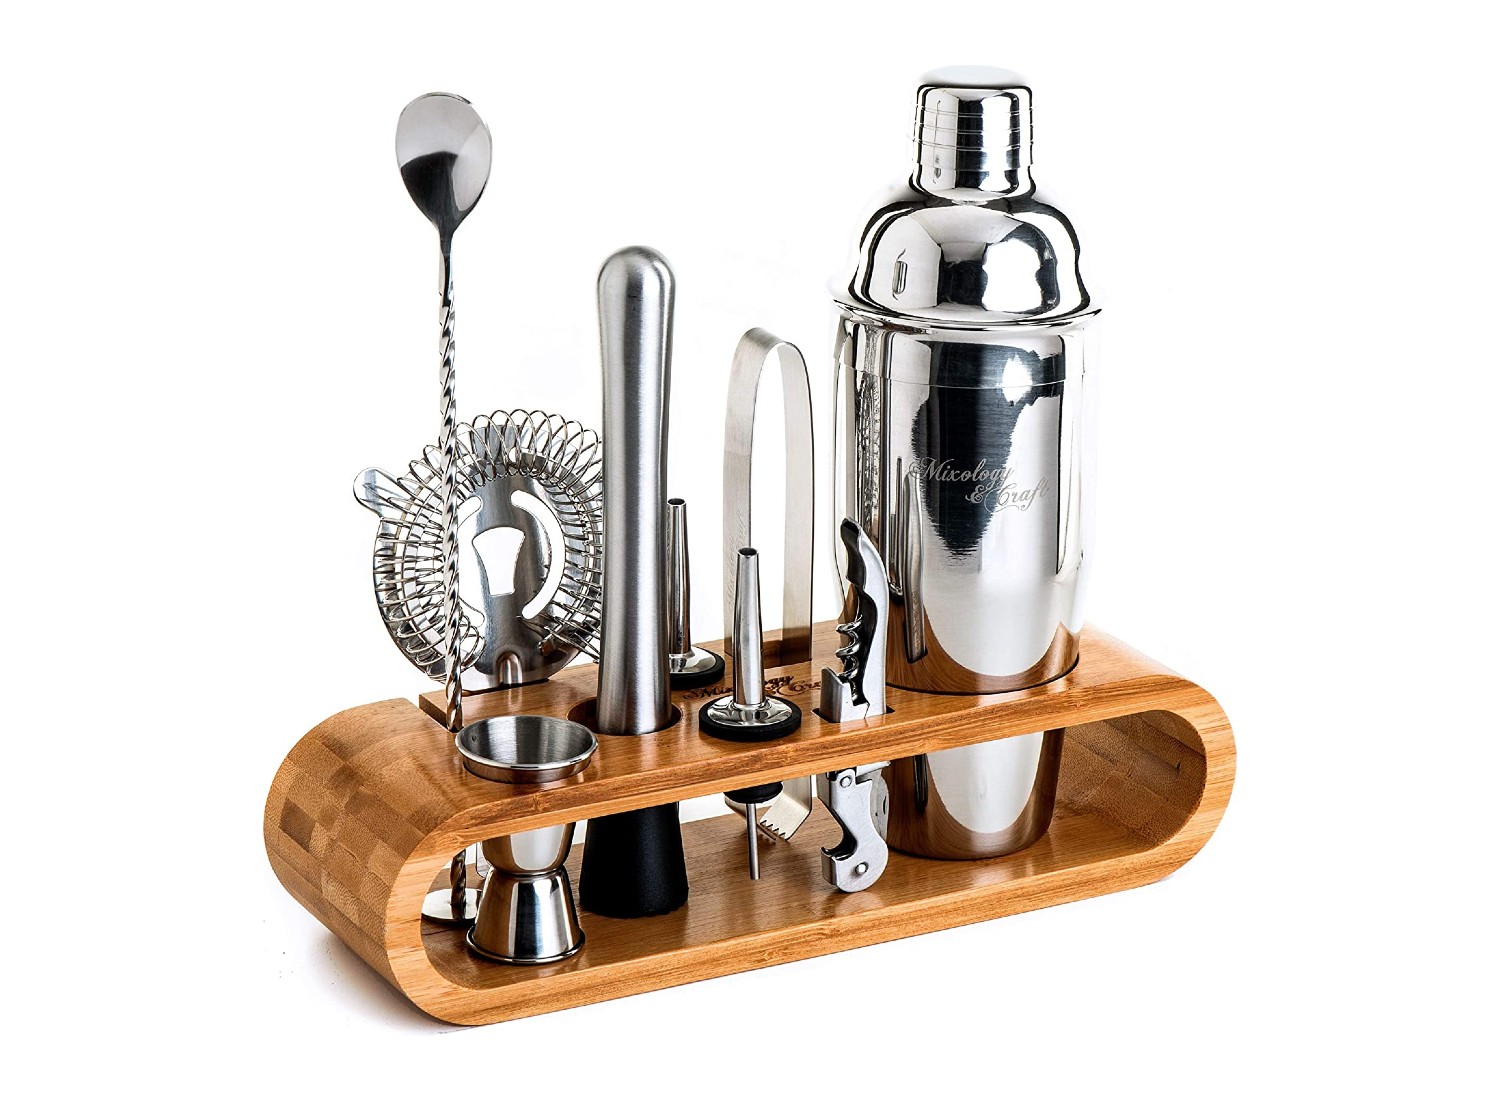 https://www.brit.co/reviews/wp-content/uploads/2023/11/Mixology-Cocktail-Shaker-Set-britco-channel-576-article-228417-review-1306209.jpg